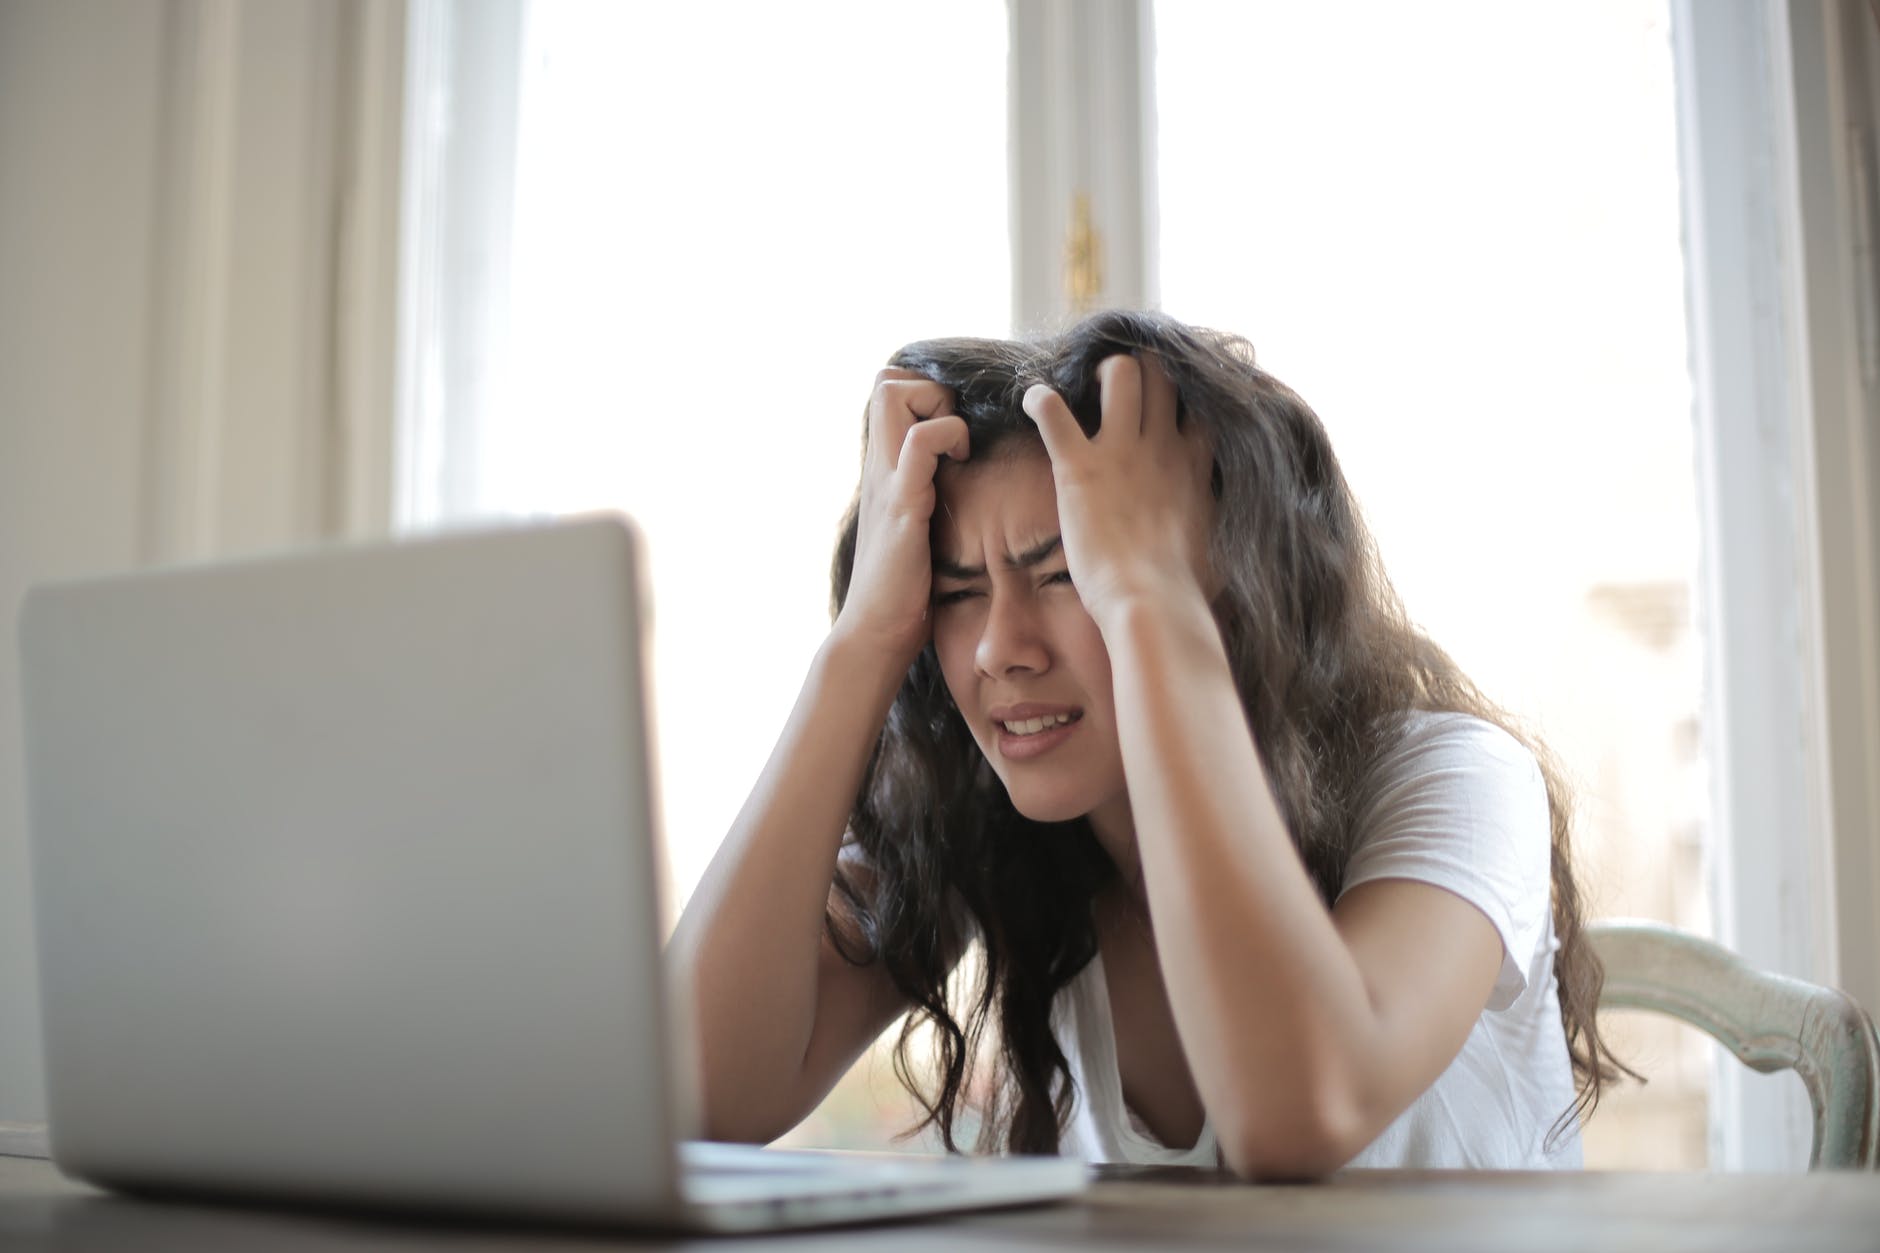 Frustrated woman with her head in her hands looking at her laptop